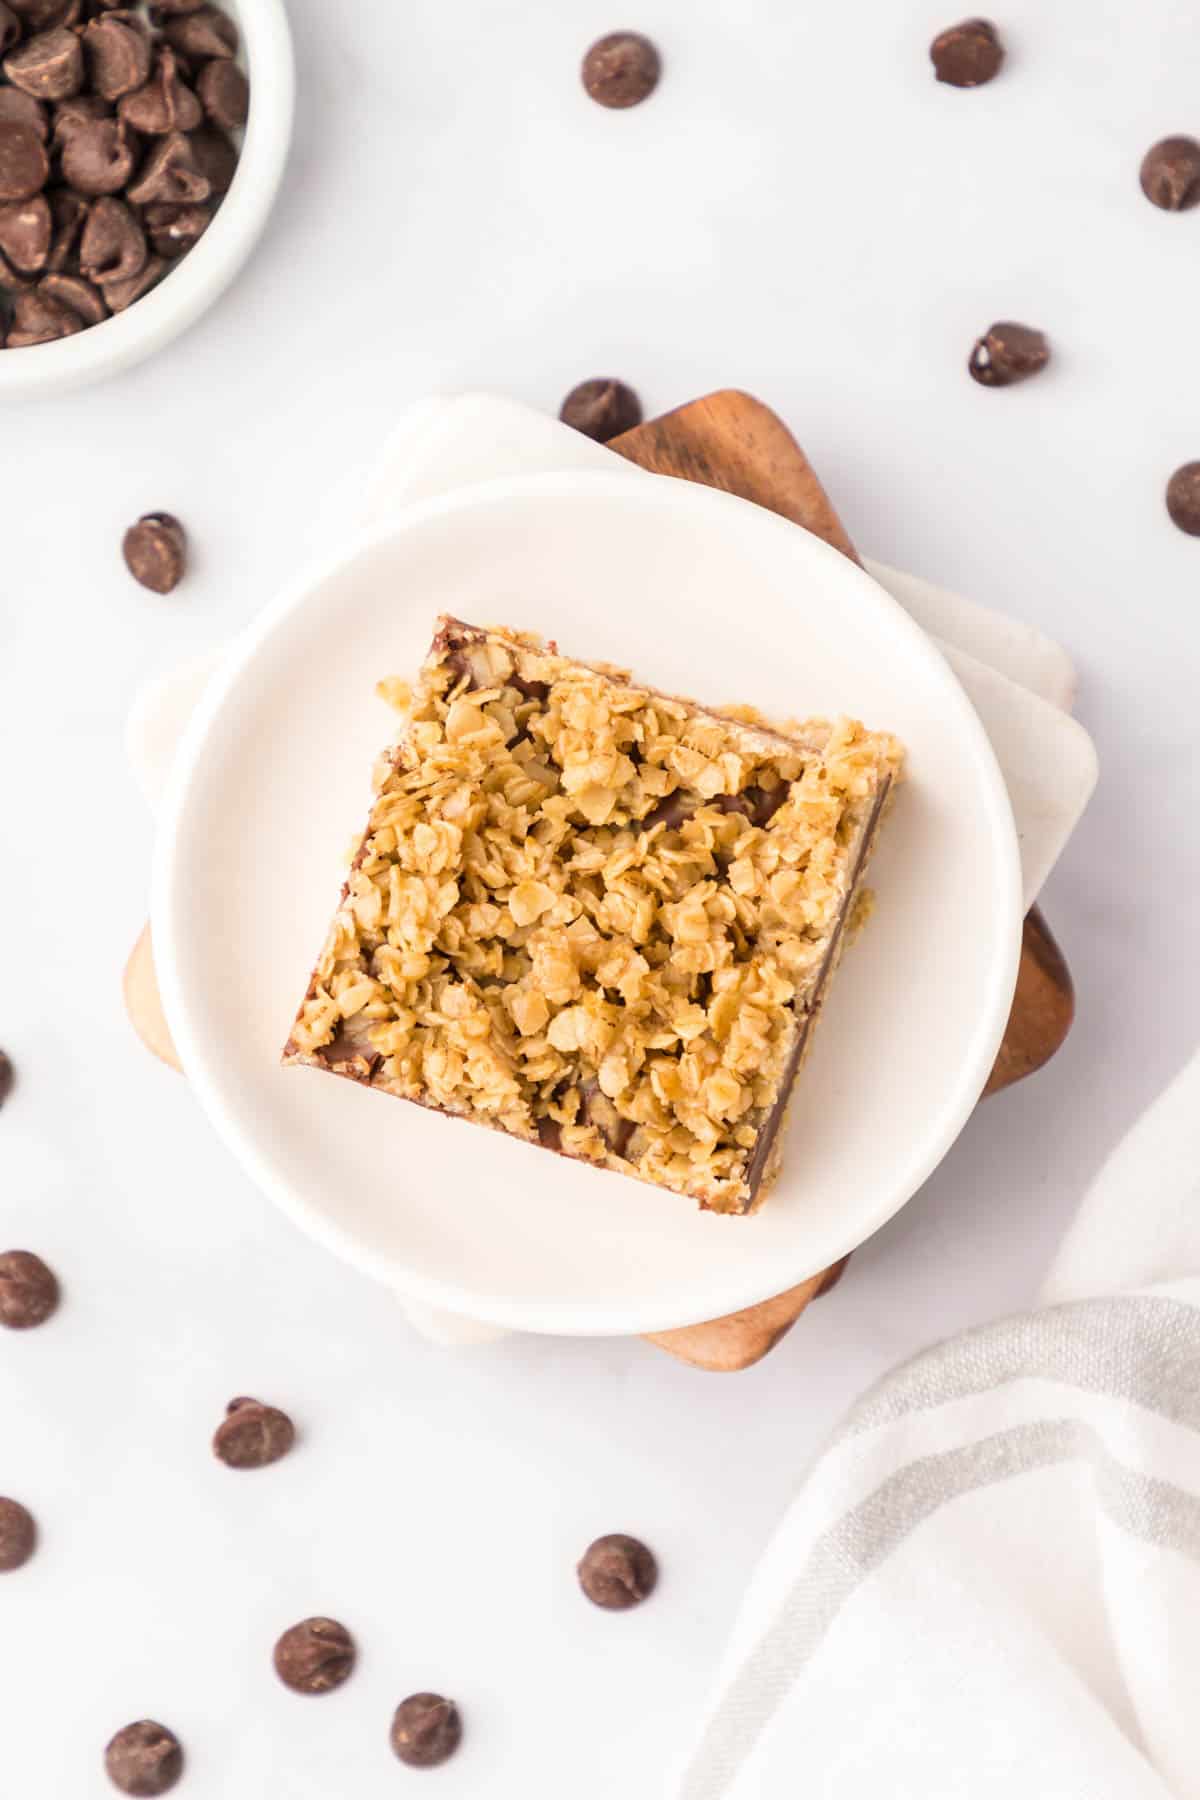 No Bake Chocolate Oat Bars are an easy 7 ingredient dessert recipe with layers of oats and a chocolate peanut butter center.